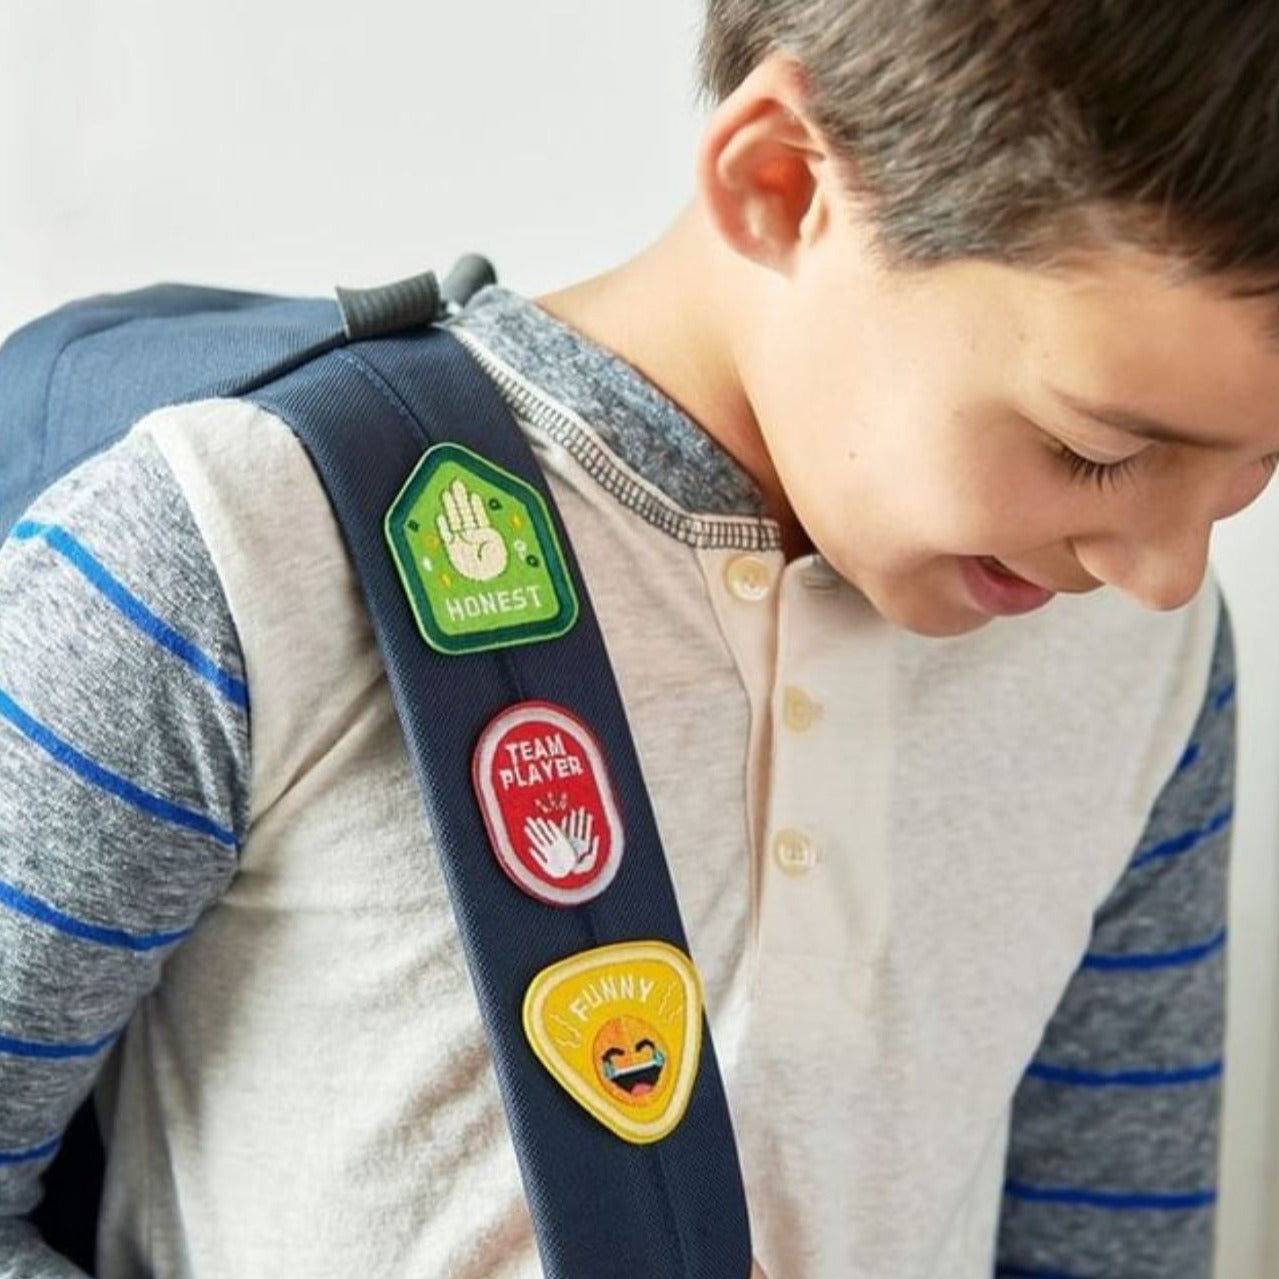 Set of 4 Character Badge Patches featuring the traits Curious, Honest, Brave, and Perseverance, shown on a backpack strap worn by a young boy, designed for children and ideal for backpacks or clothing. Adhesive and iron-on backing for easy application.